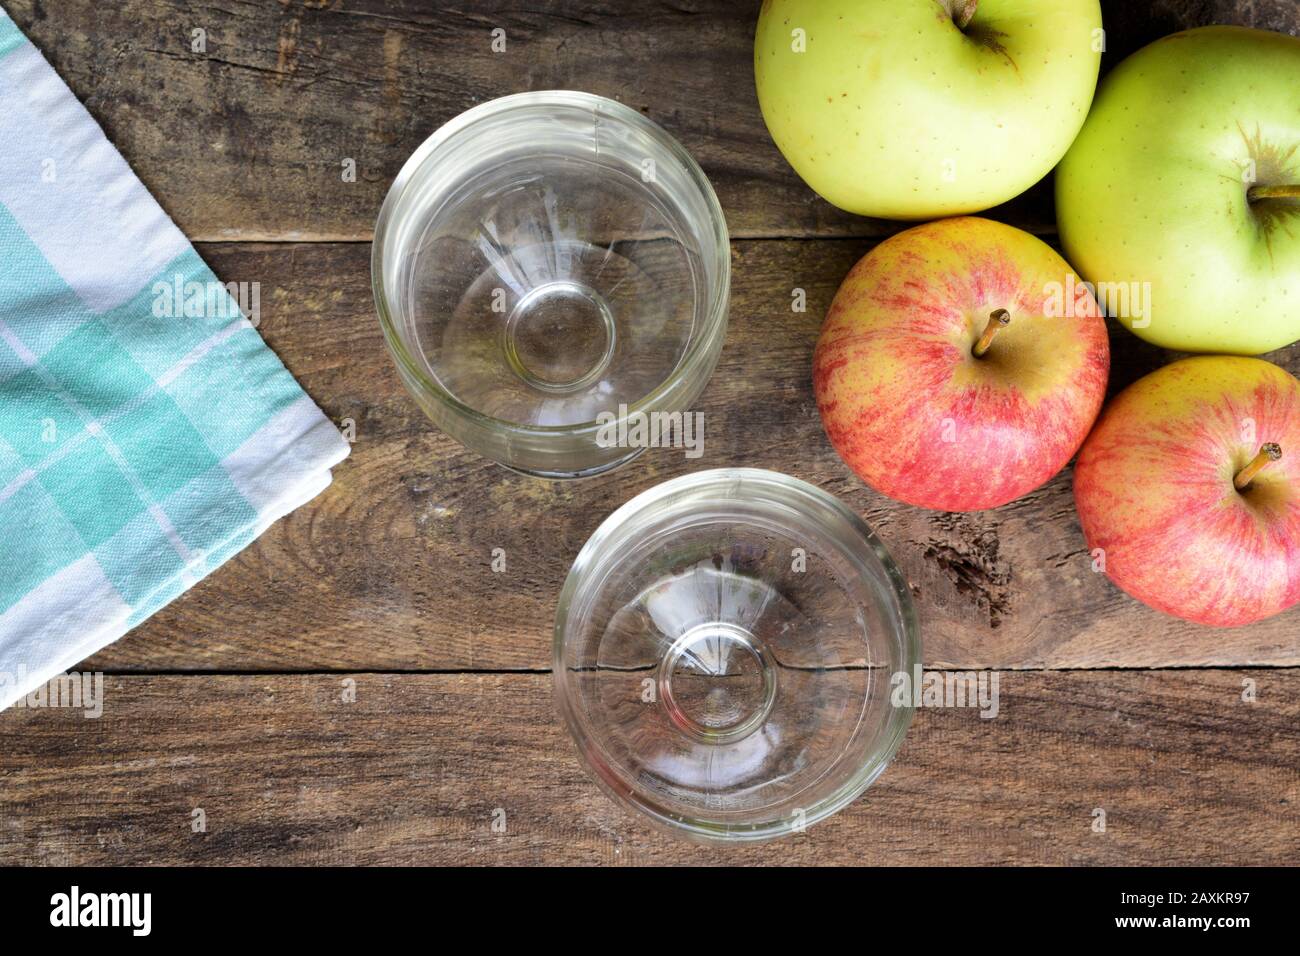 https://c8.alamy.com/comp/2AXKR97/old-wood-table-with-some-apples-two-empty-glasses-and-a-white-and-green-tablecloth-2AXKR97.jpg